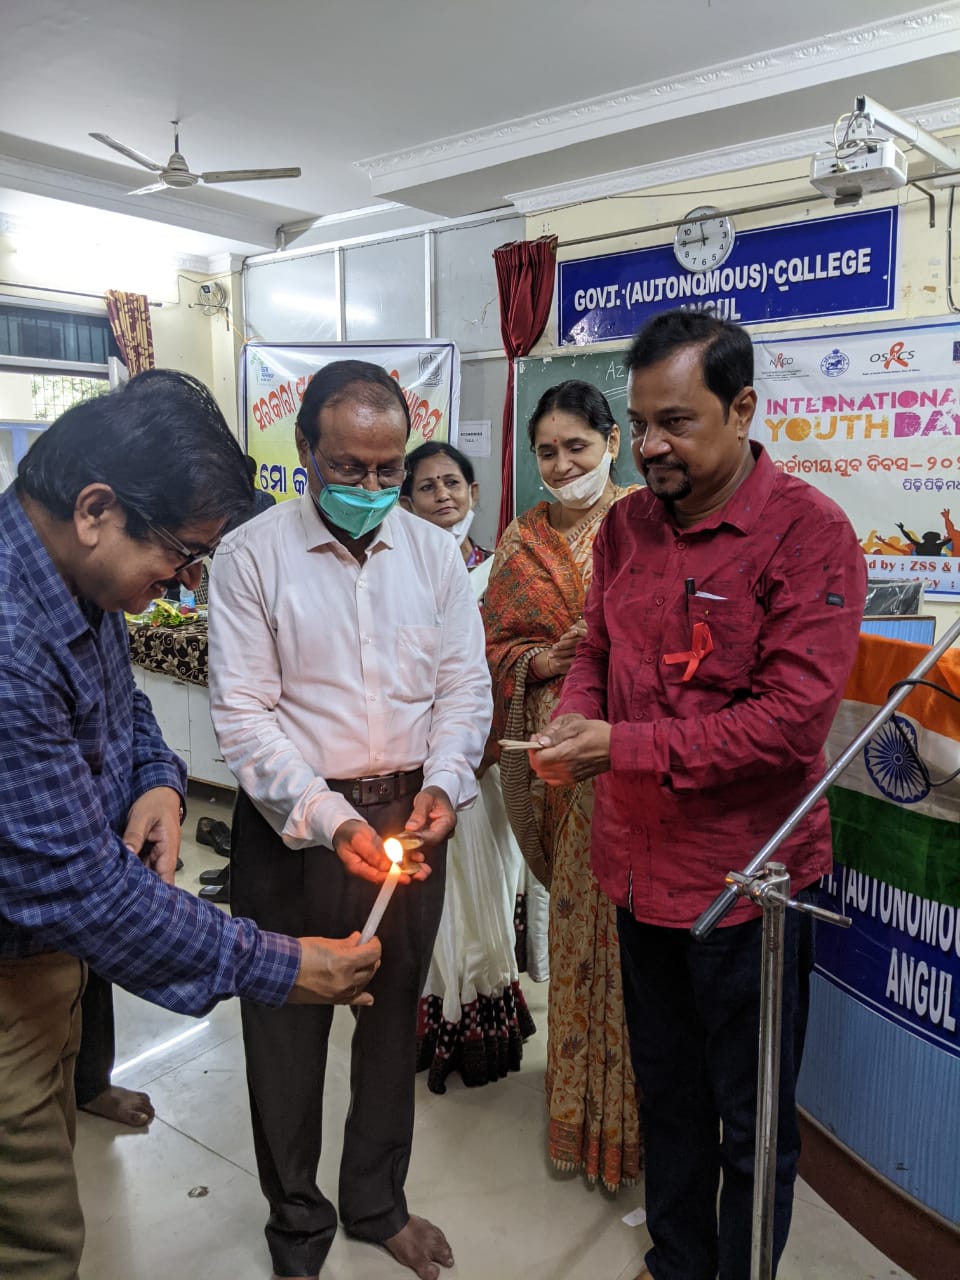 Our esteemed Principal and Director of DAPCU Dr Banabihari Mohanty inaugurating Competitions on AIDS awareness